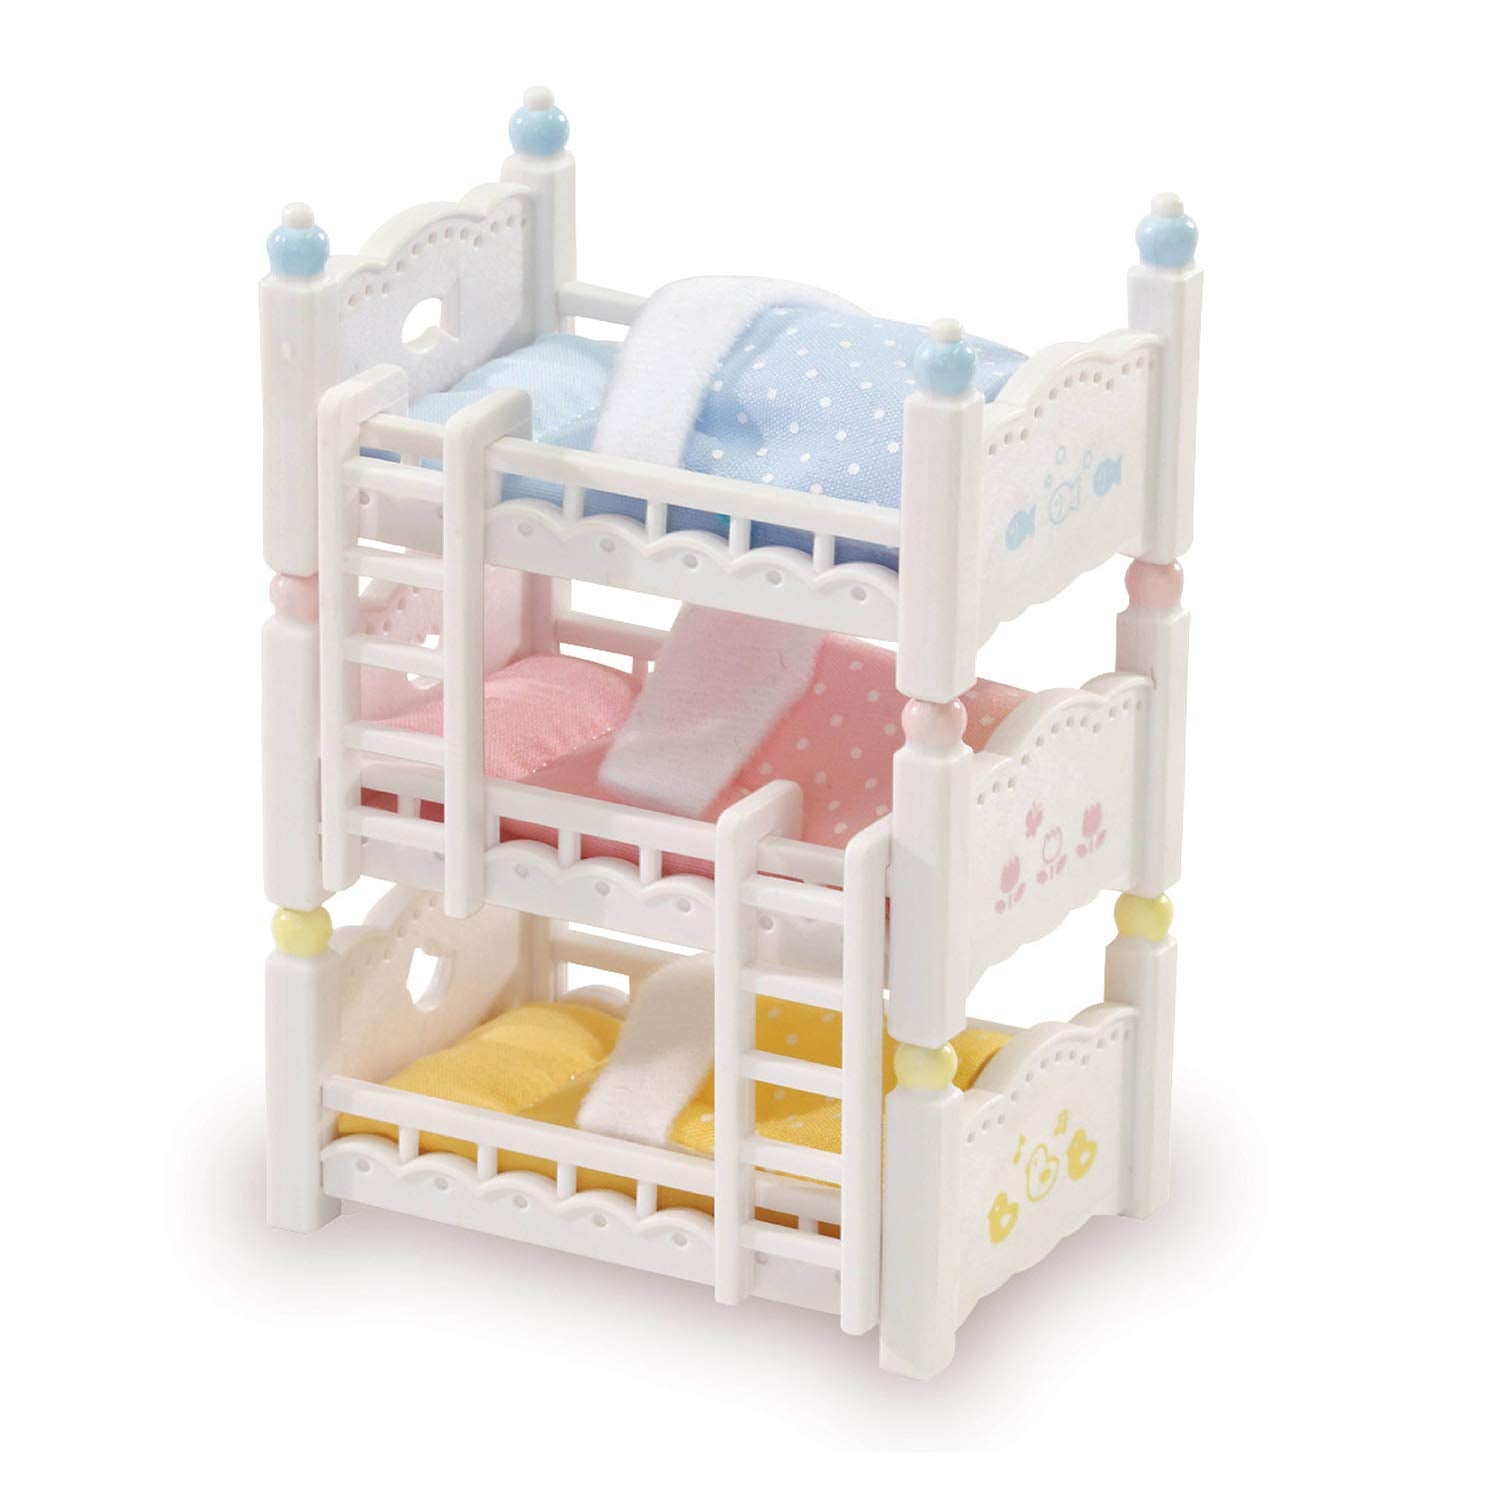 Calico Critters Triple Baby Bunk Beds